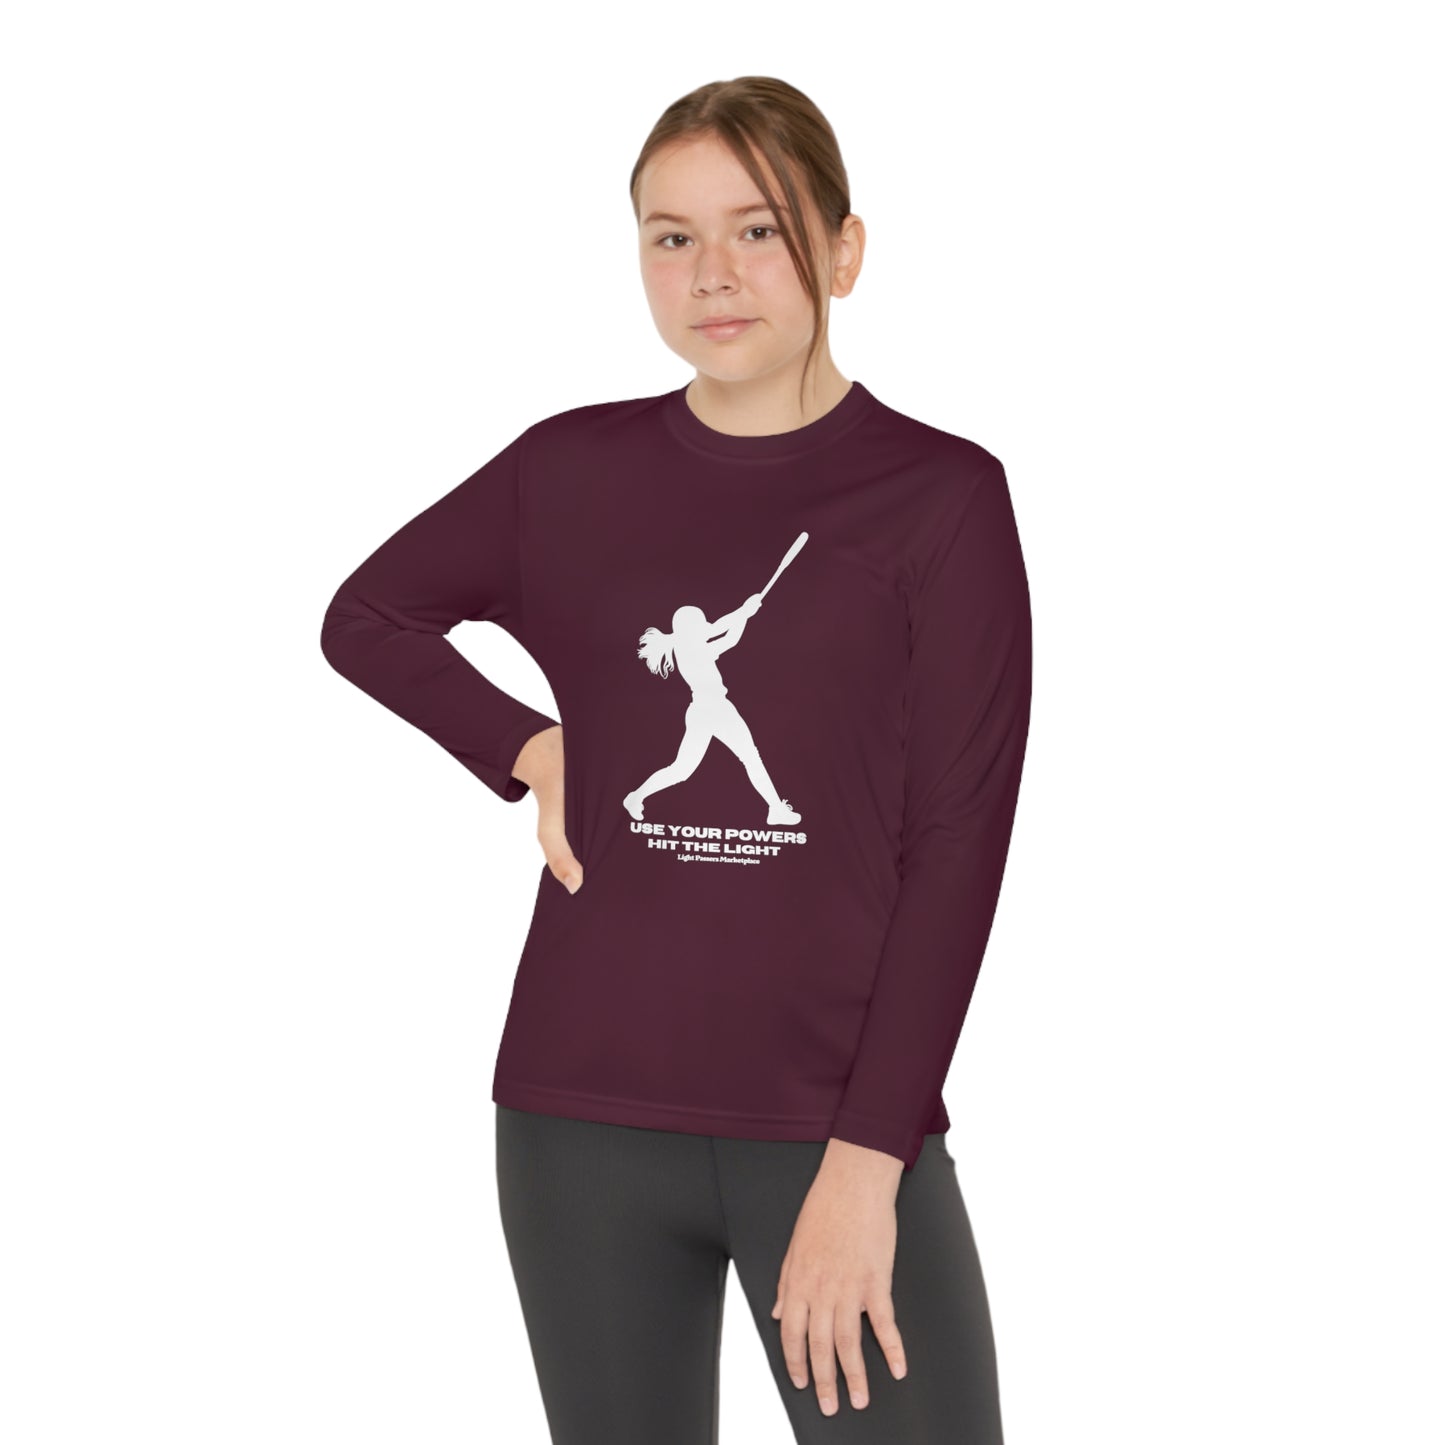 A girl in a maroon long-sleeve tee swings a bat, embodying active comfort. Made of 100% moisture-wicking polyester, lightweight, and breathable for active kids.